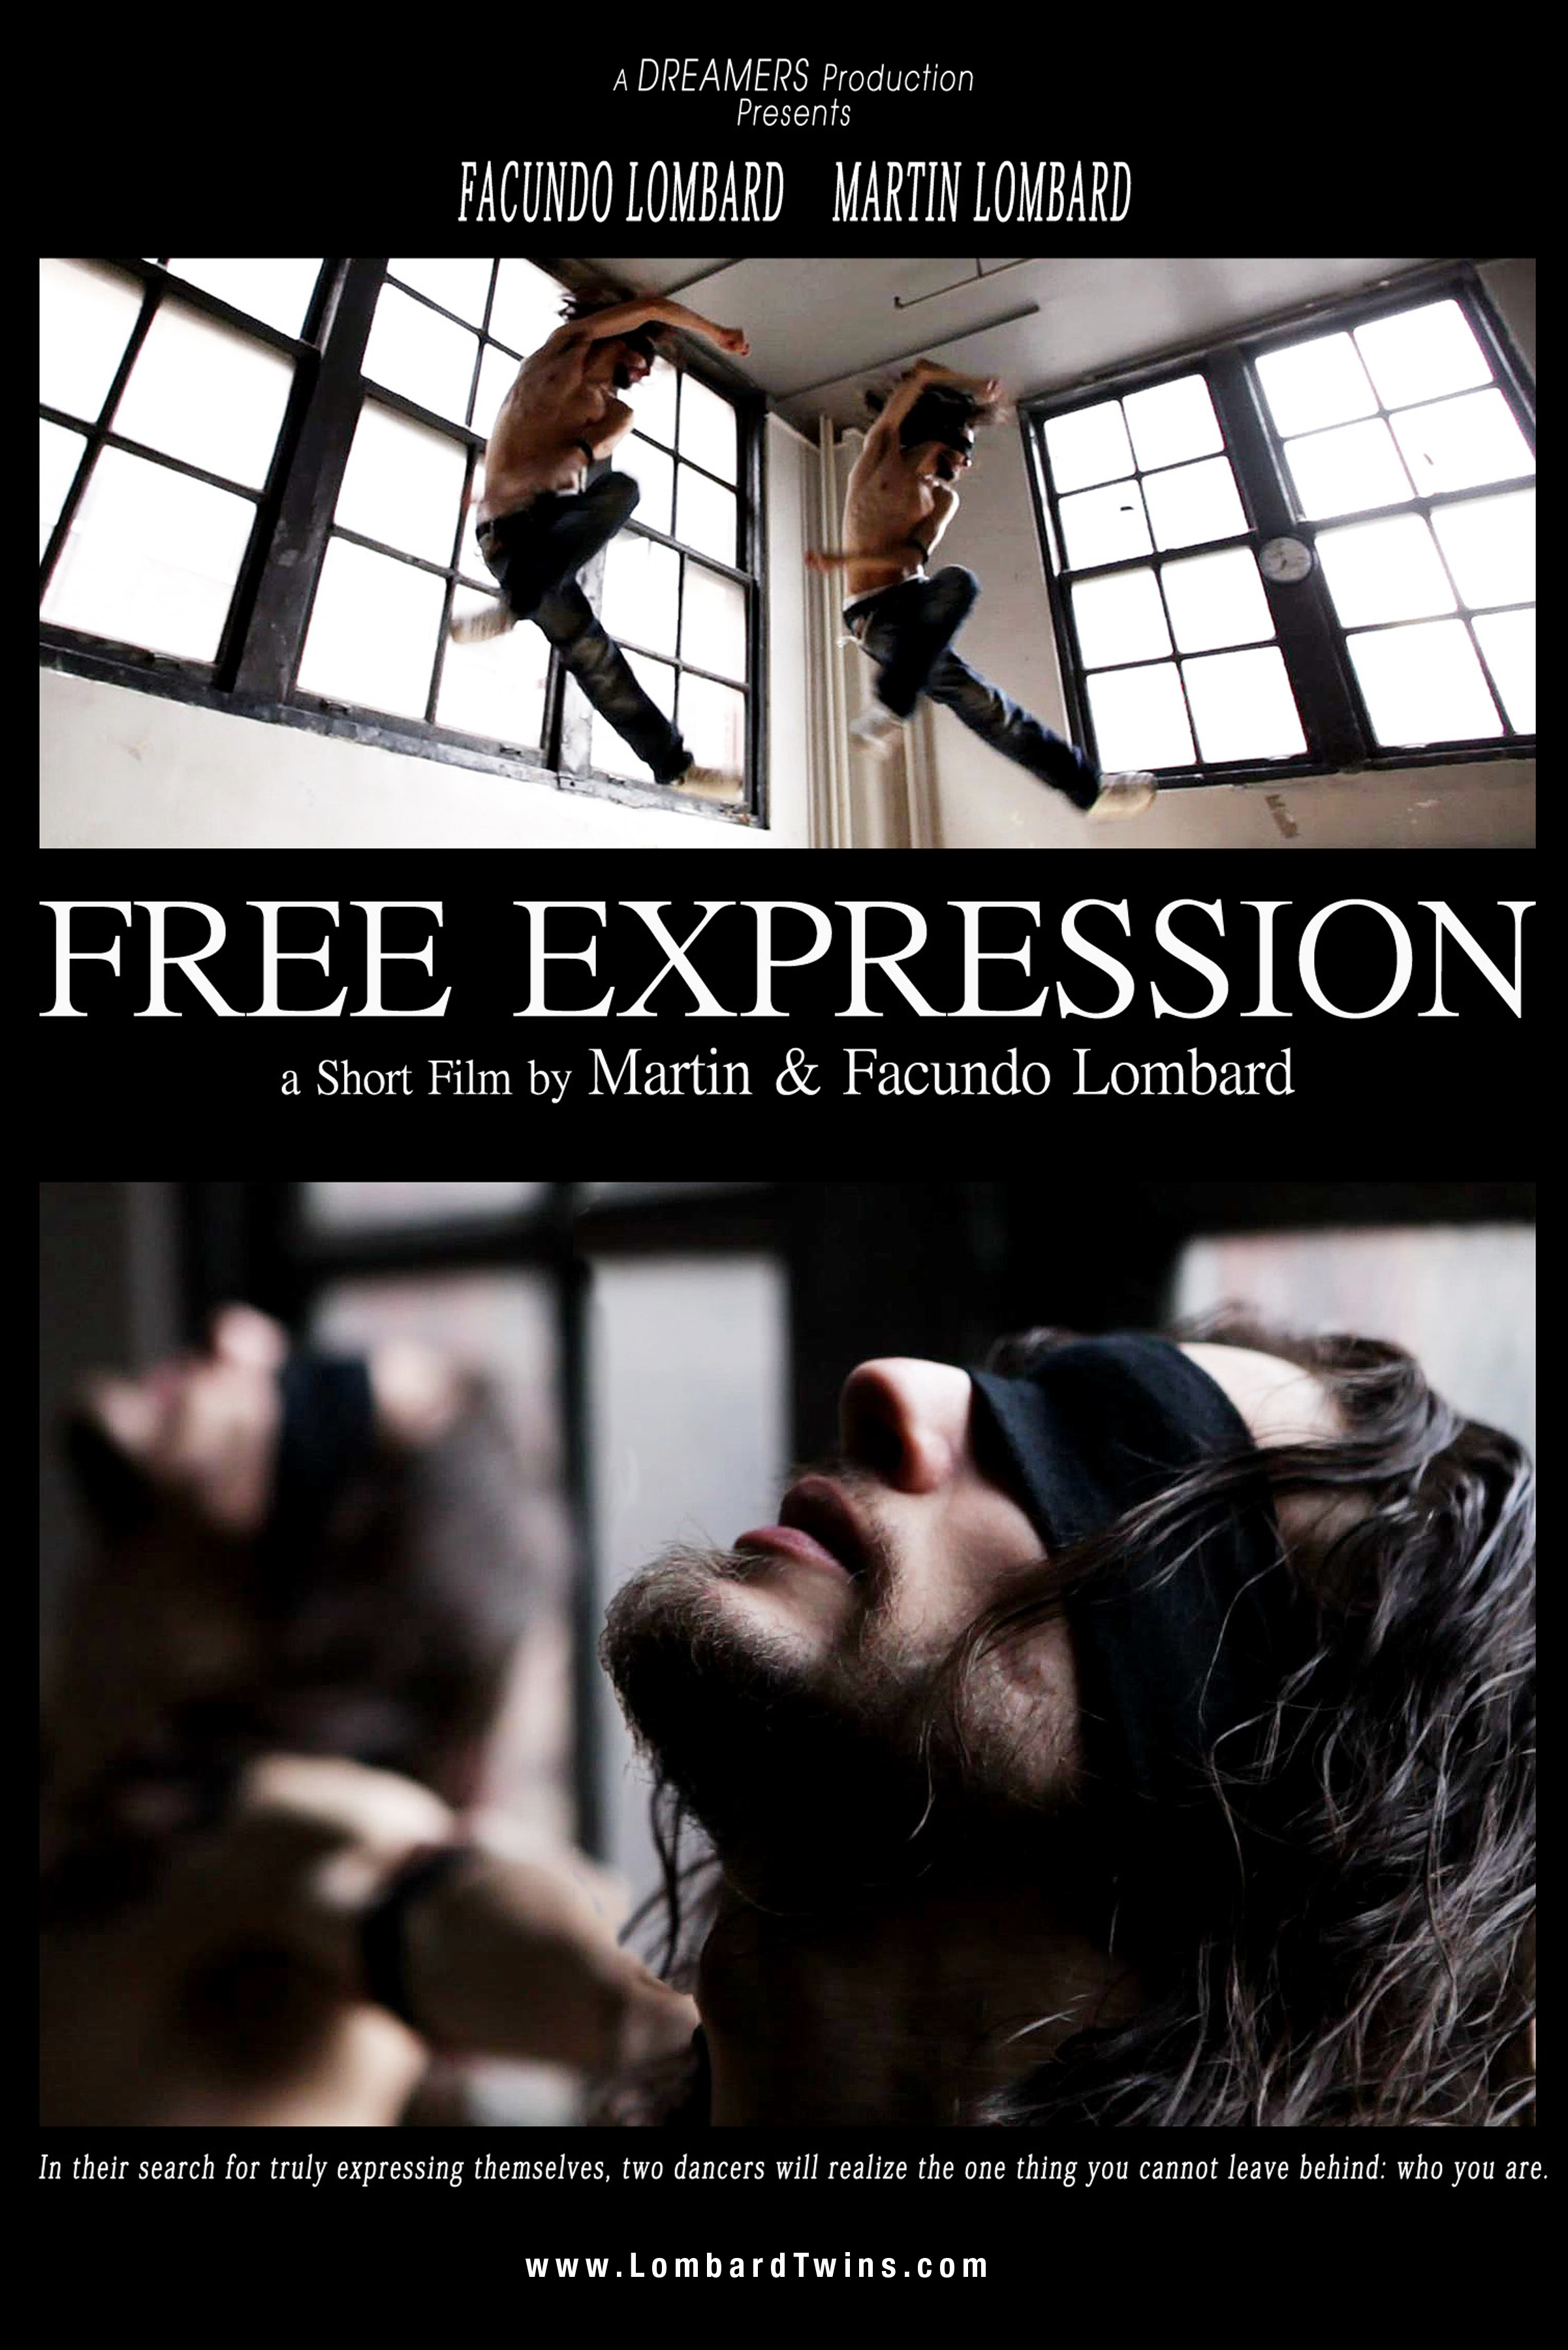 Free Expression. A short film written, directed and starred by Martín & Facundo Lombard (2012)